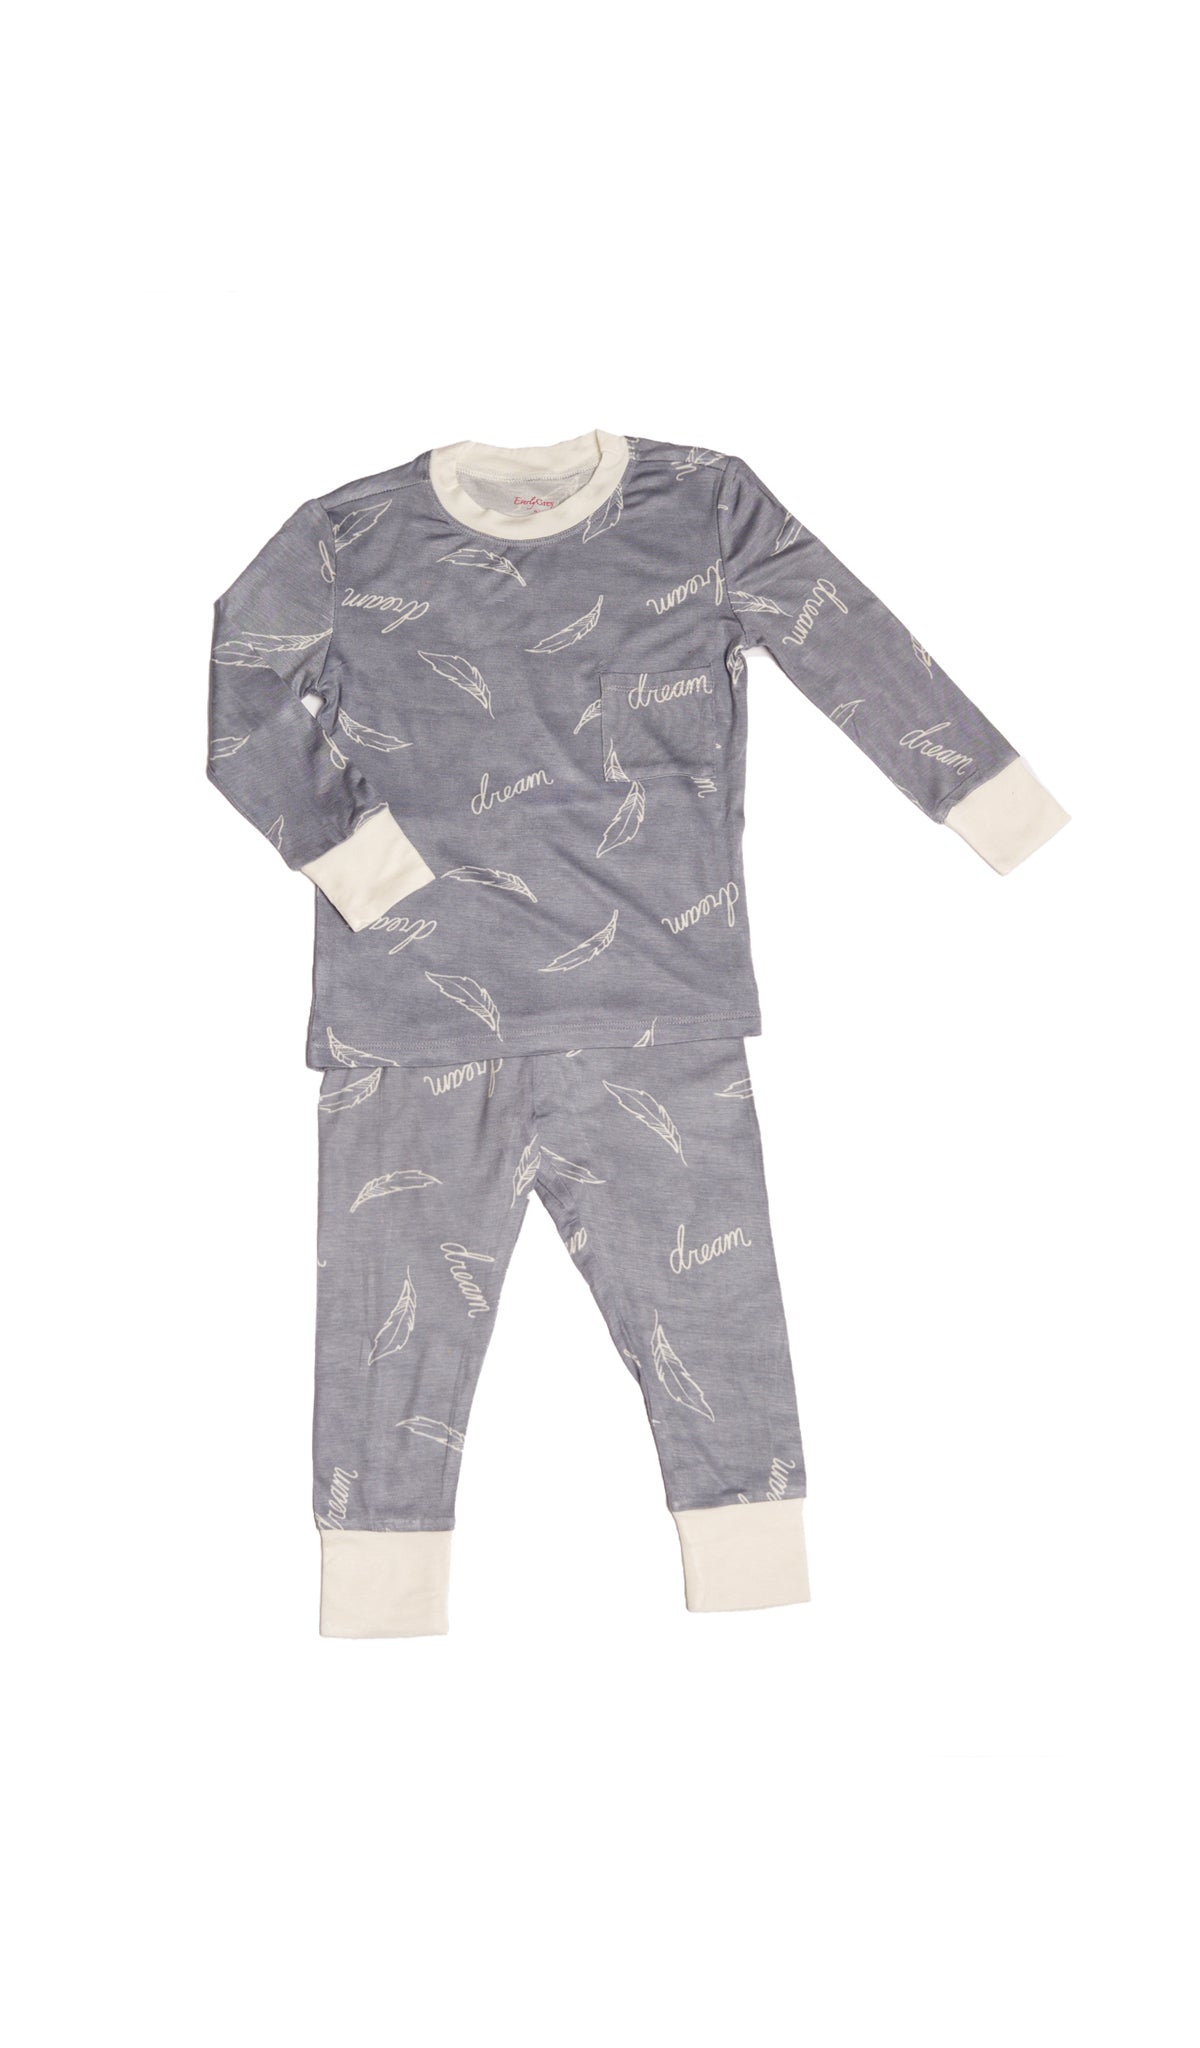 Dream Emerson Kids 2-Piece Pant PJ. Long sleeve top with cuff trim and long pant with cuff trim.